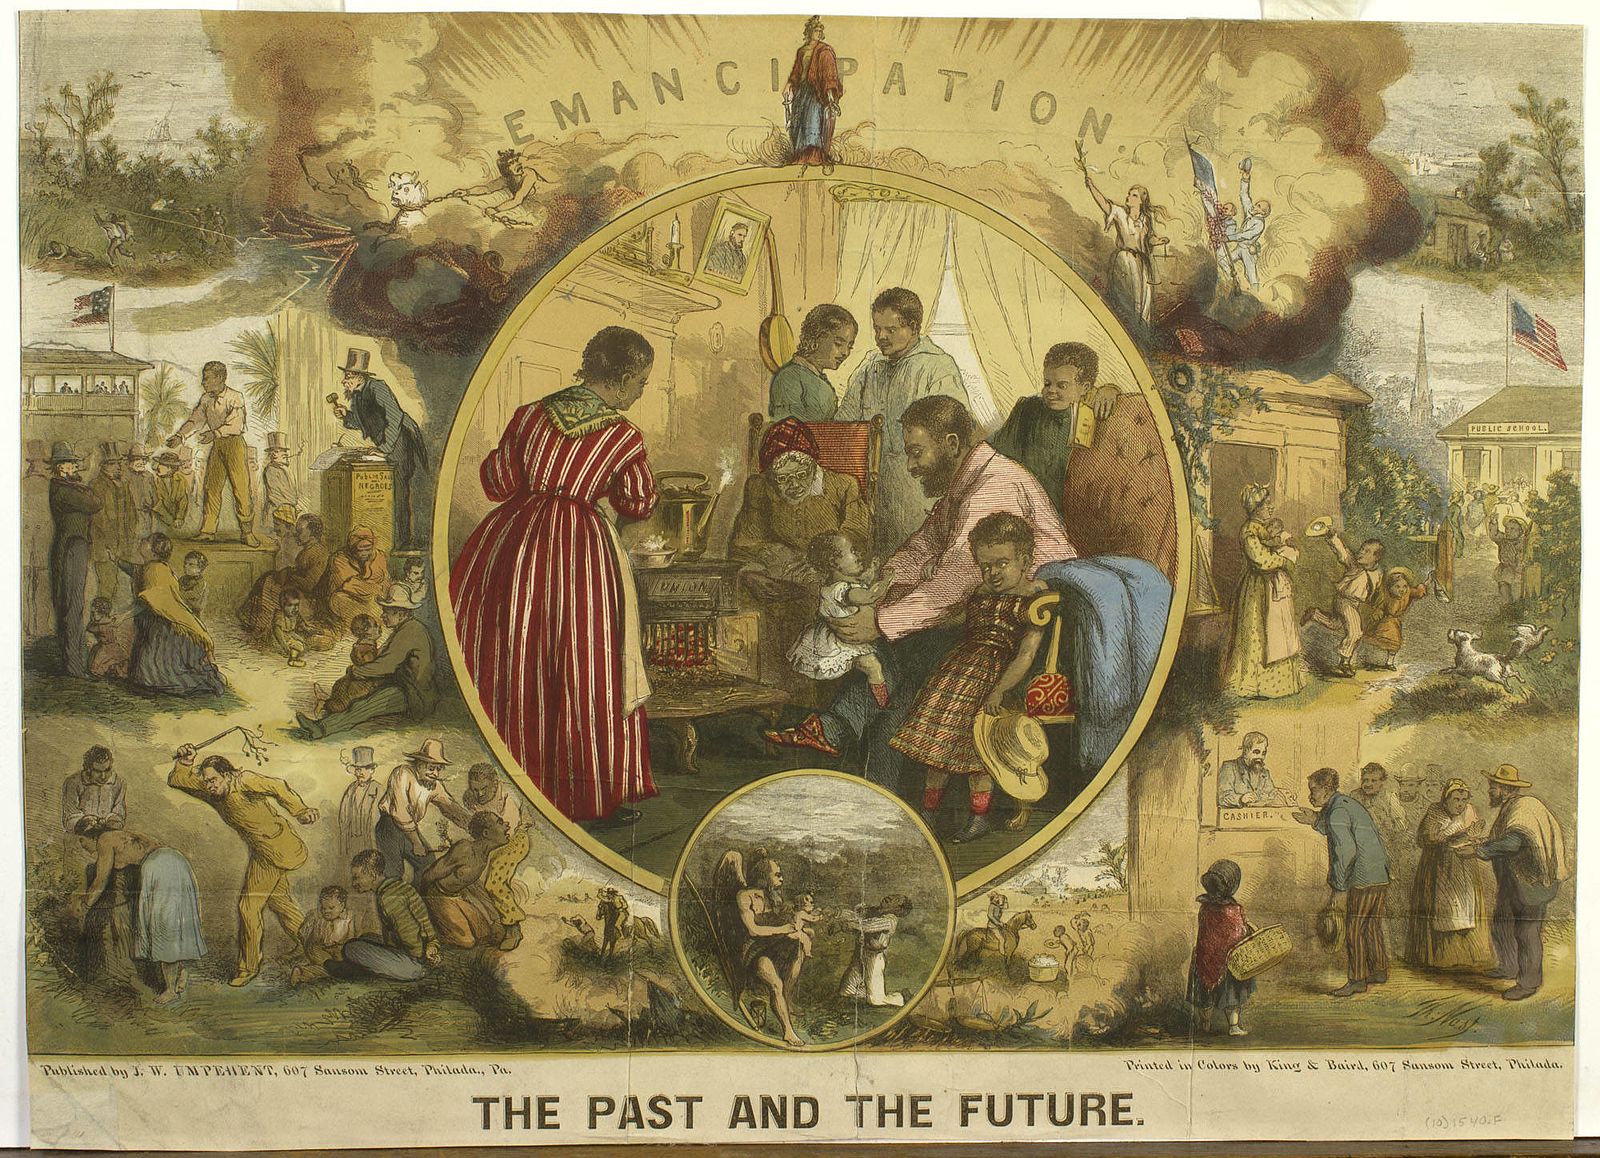 Image representing the past before slavery, and the future after, with an image of a Black family in the middle with the words 